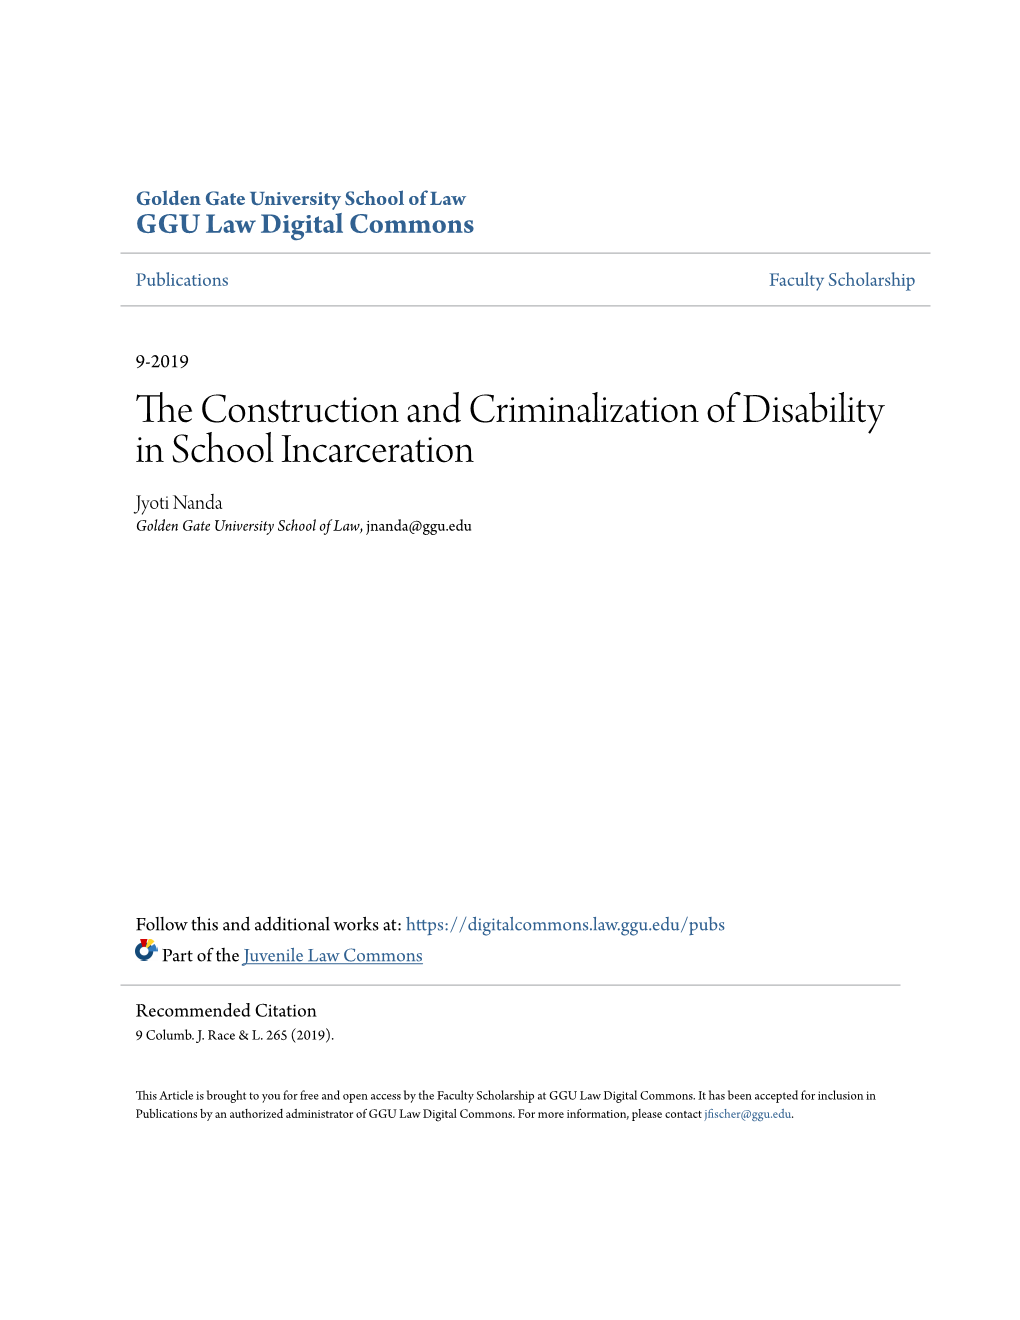 The Construction and Criminalization of Disability in School Incarceration